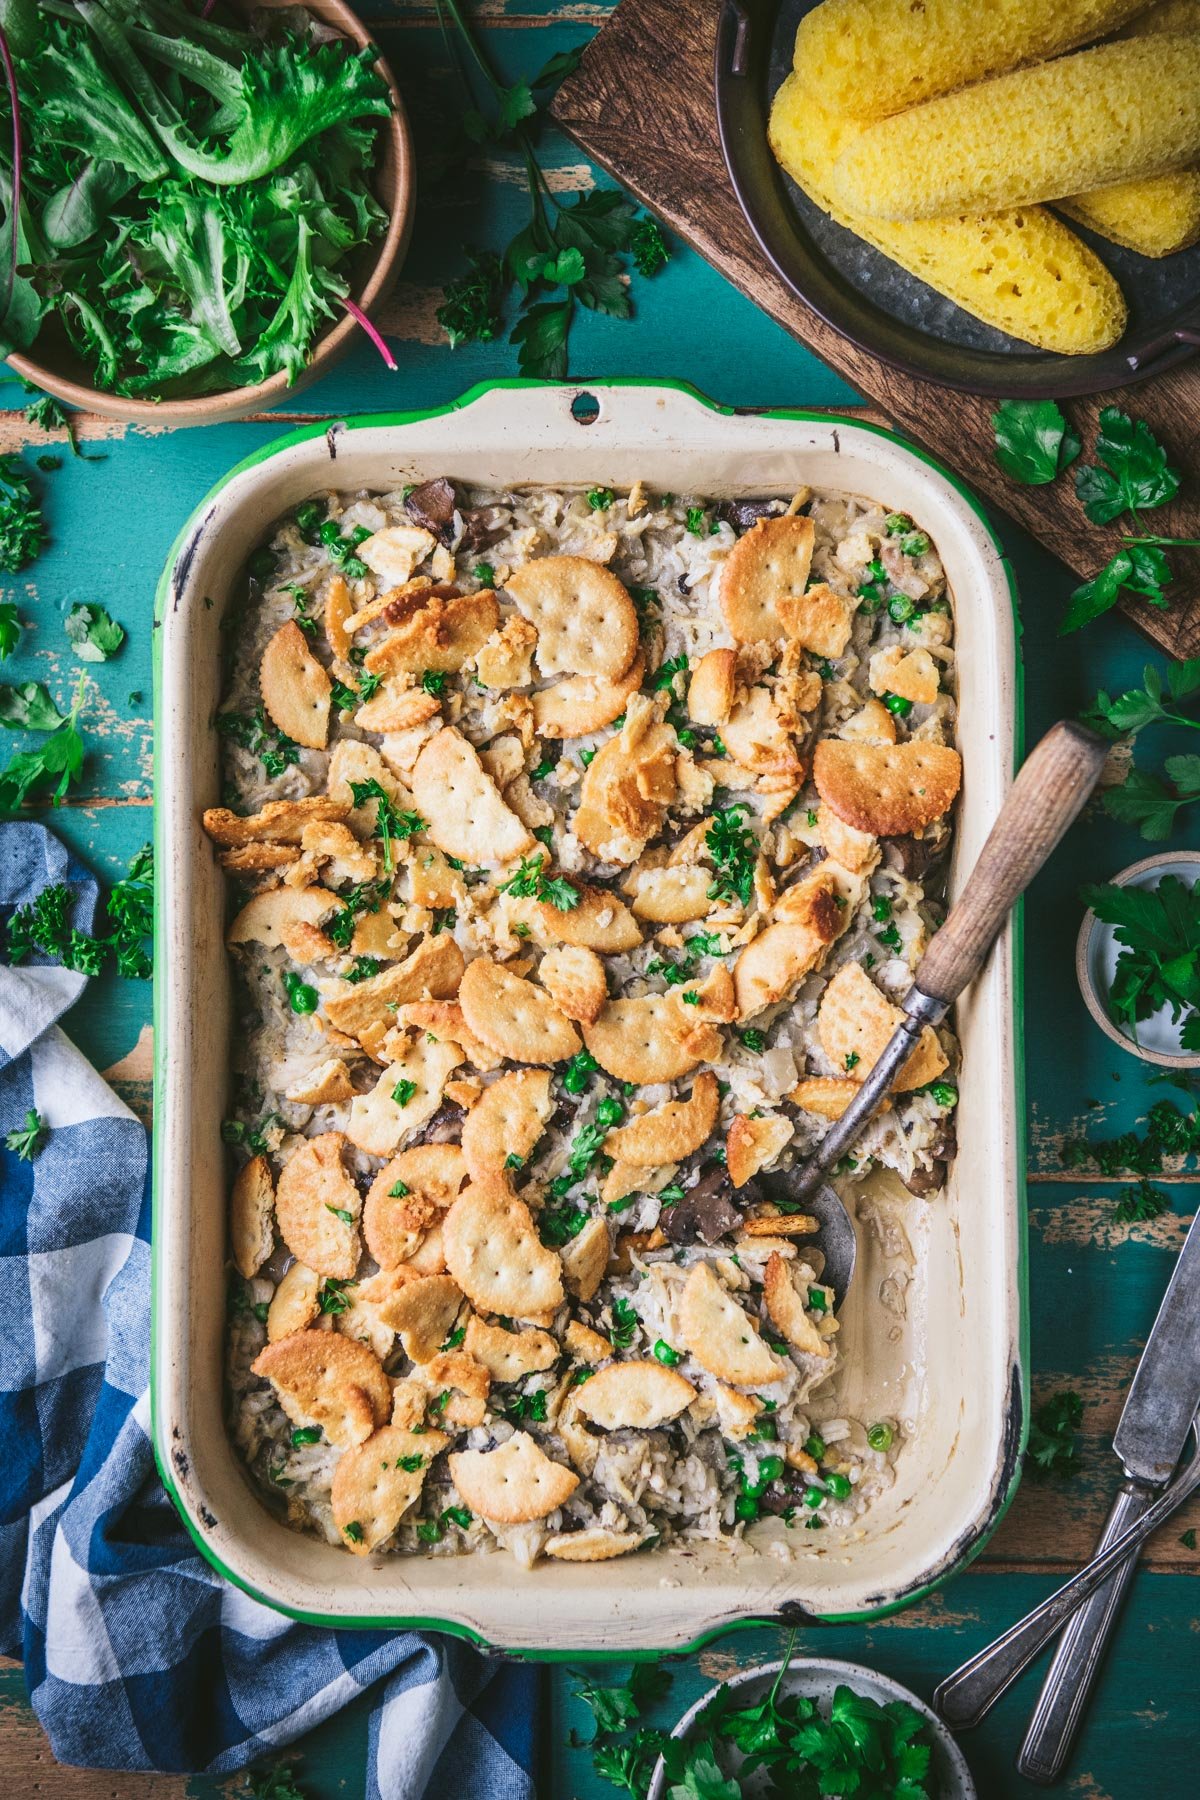 Chicken mushroom rice casserole in a vintage enamelware dish on an old wooden table.